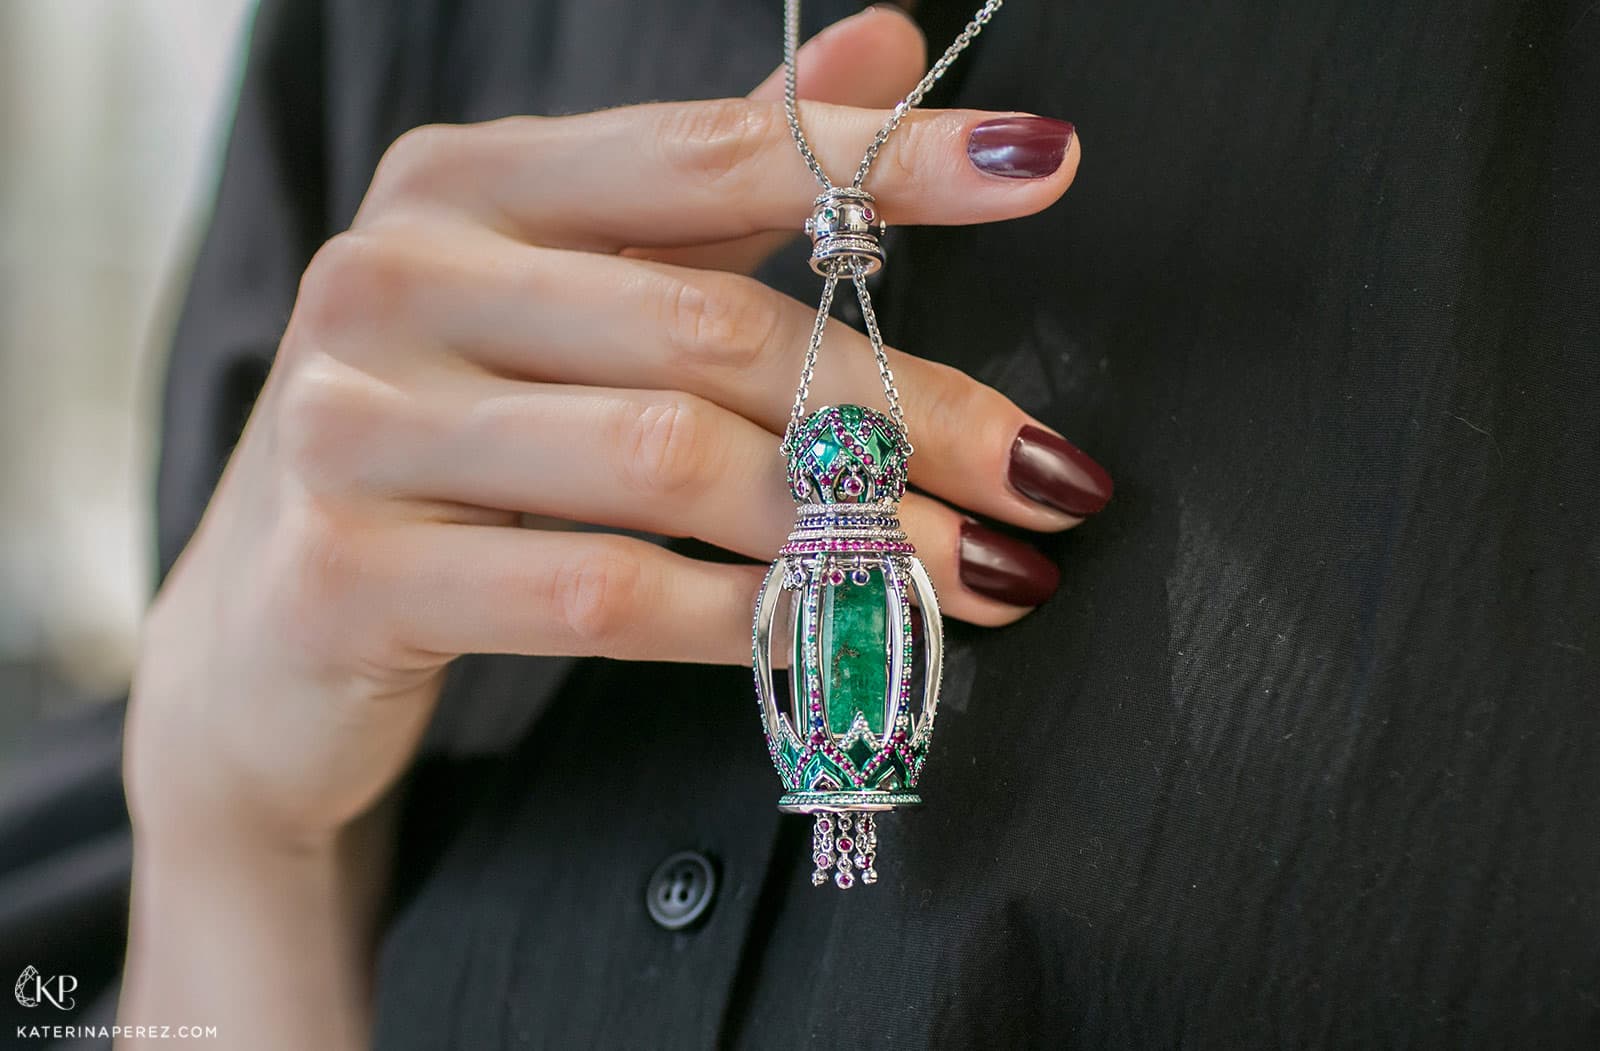 Alyona Russu's 'Russian Princess' pendant from Ringo's 'Matrena de Ural' collection with more than 19 carats of emerald, and accenting rubies, sapphires and diamonds in white gold